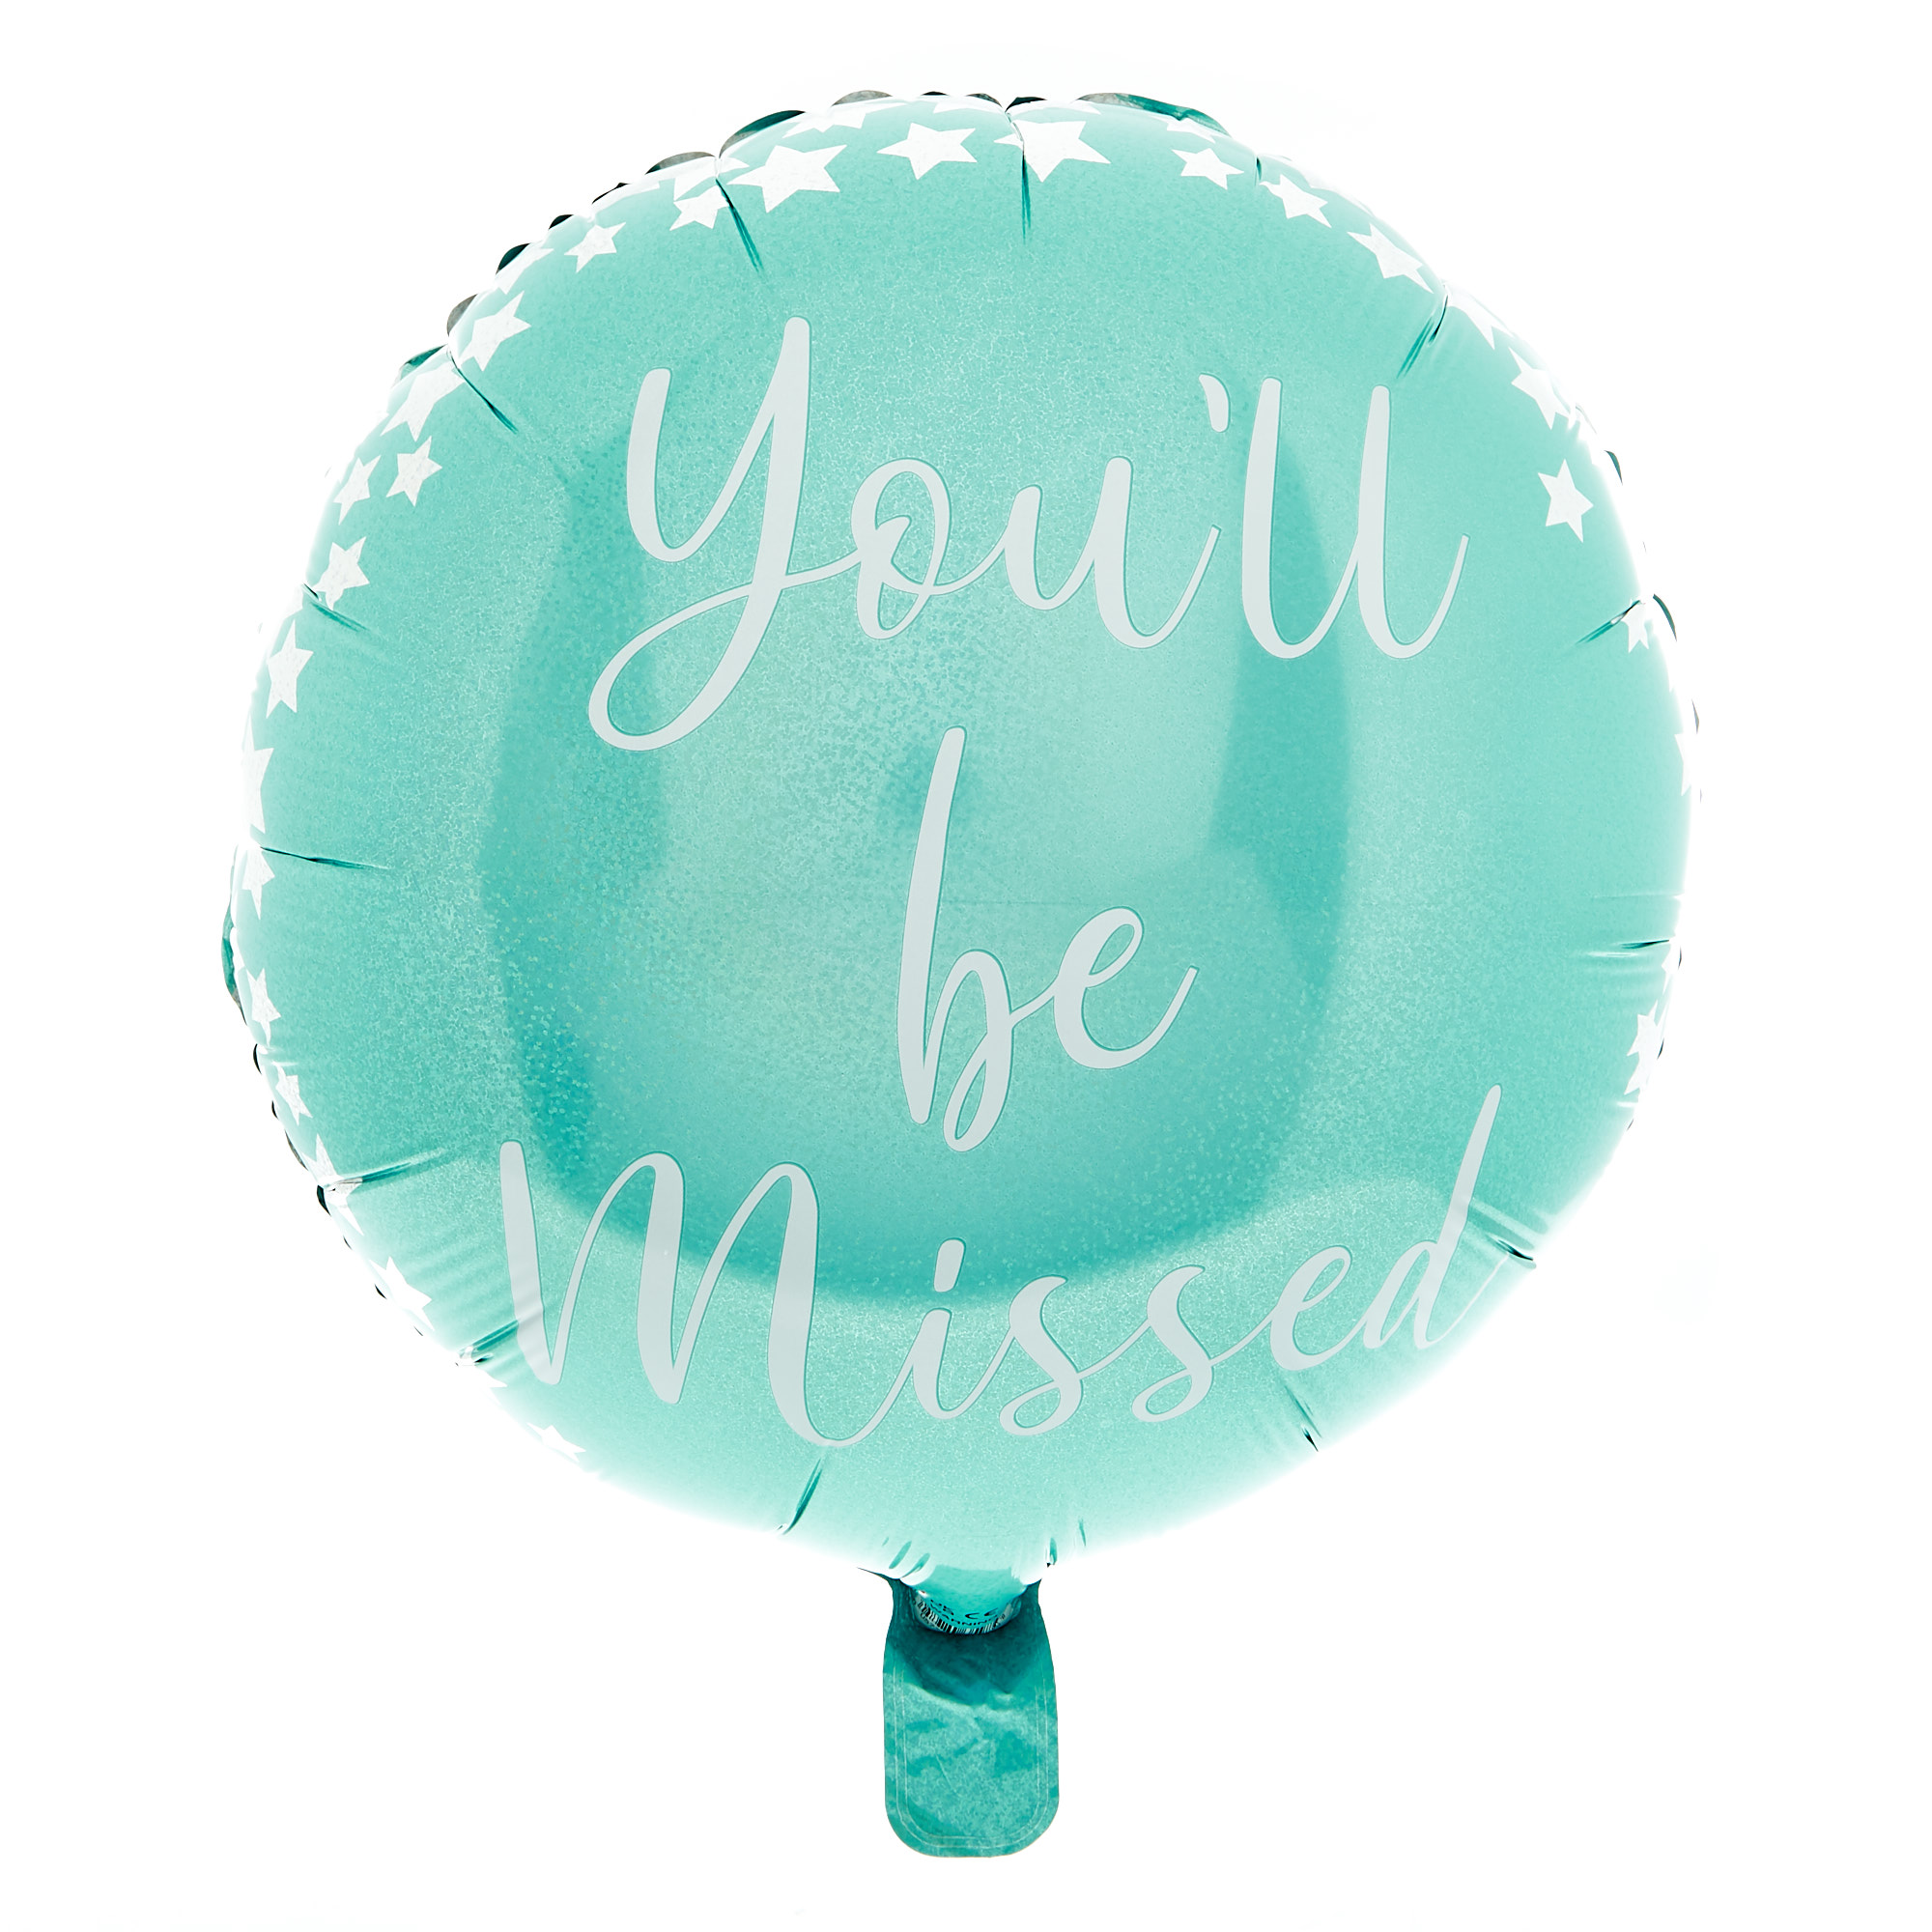 Missing you Already Balloon Bouquet - DELIVERED INFLATED!